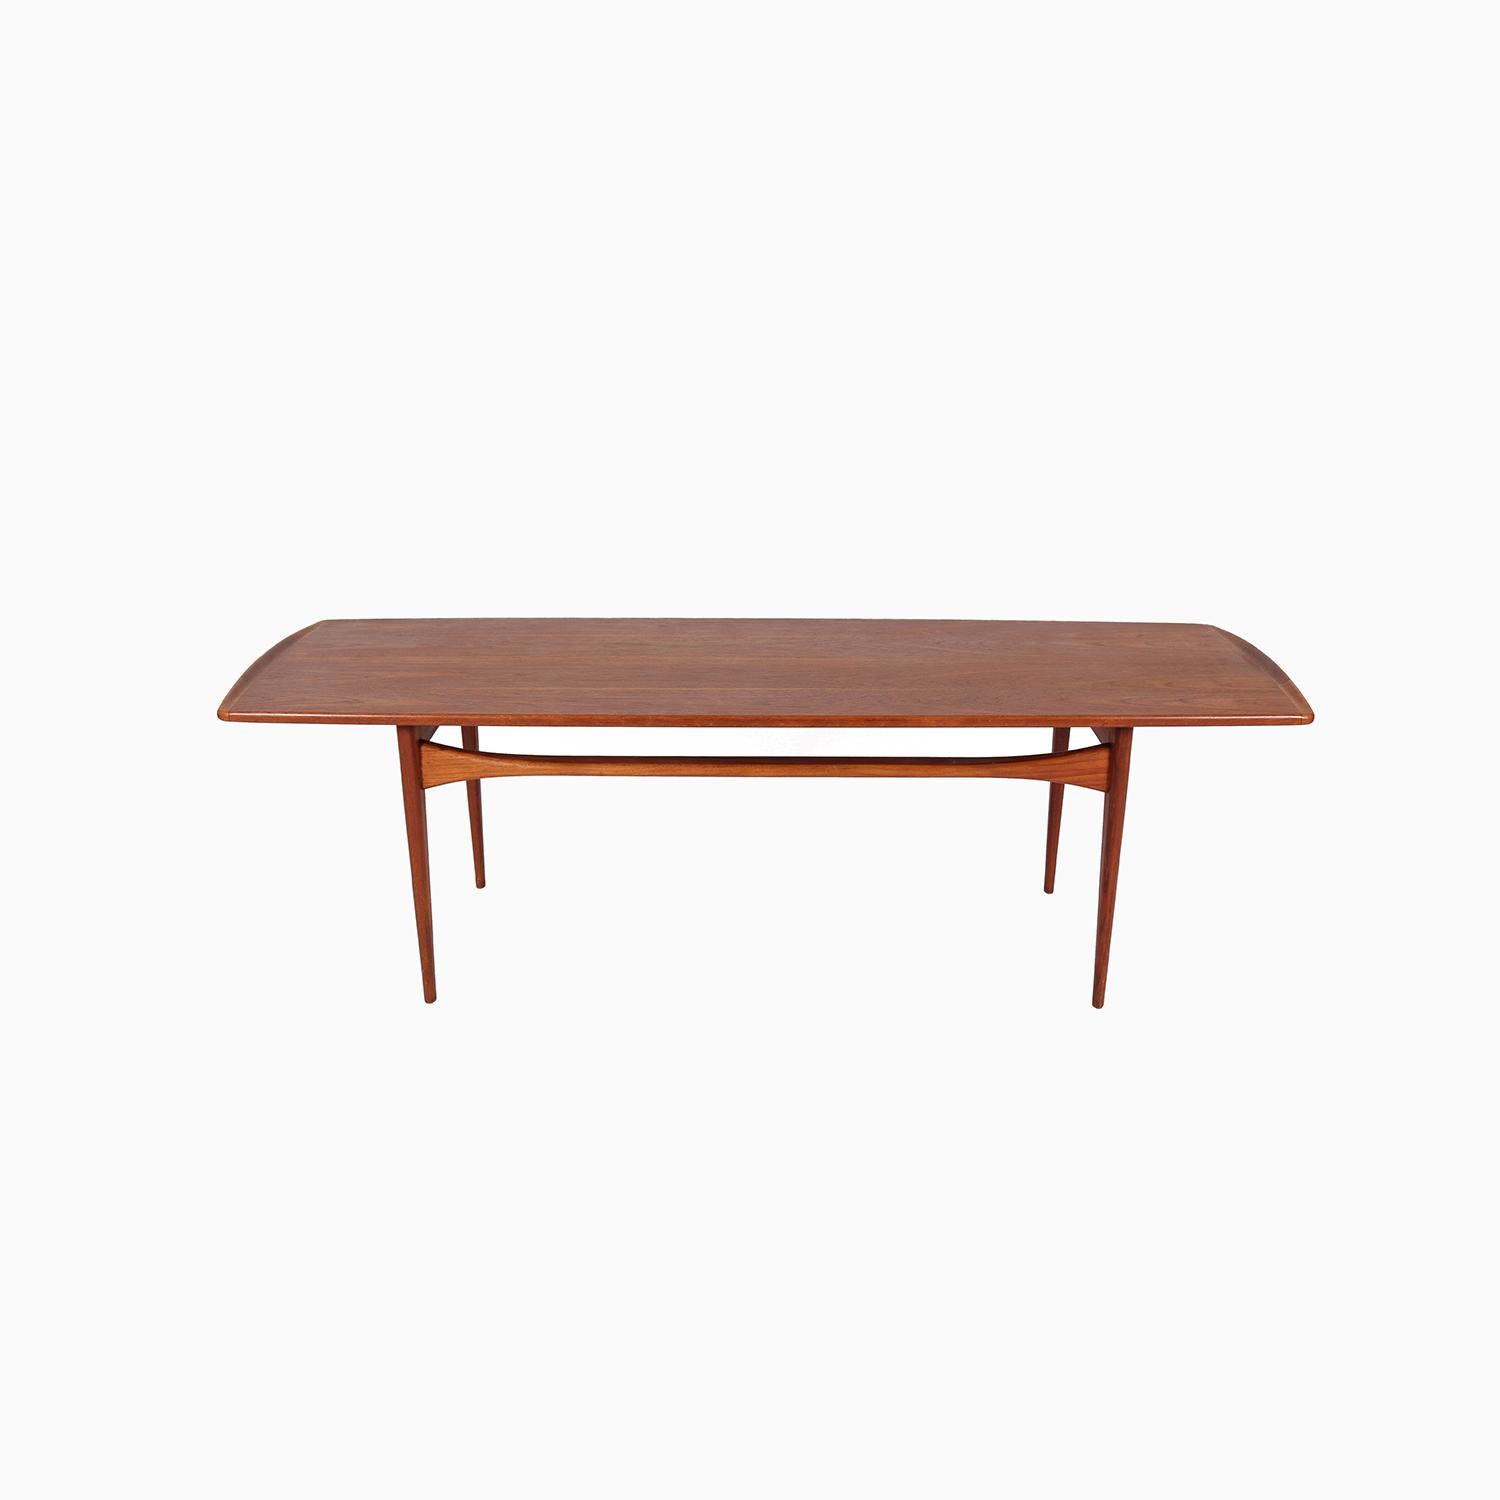 A well made and attractive coffee table designed by Tove & Edvard Lindt-Larsen. Beautifully sculpted undulating stretchers and sculpted solid teak ends. Manufactured by France & Daverkosen.

Professional, skilled furniture restoration is an